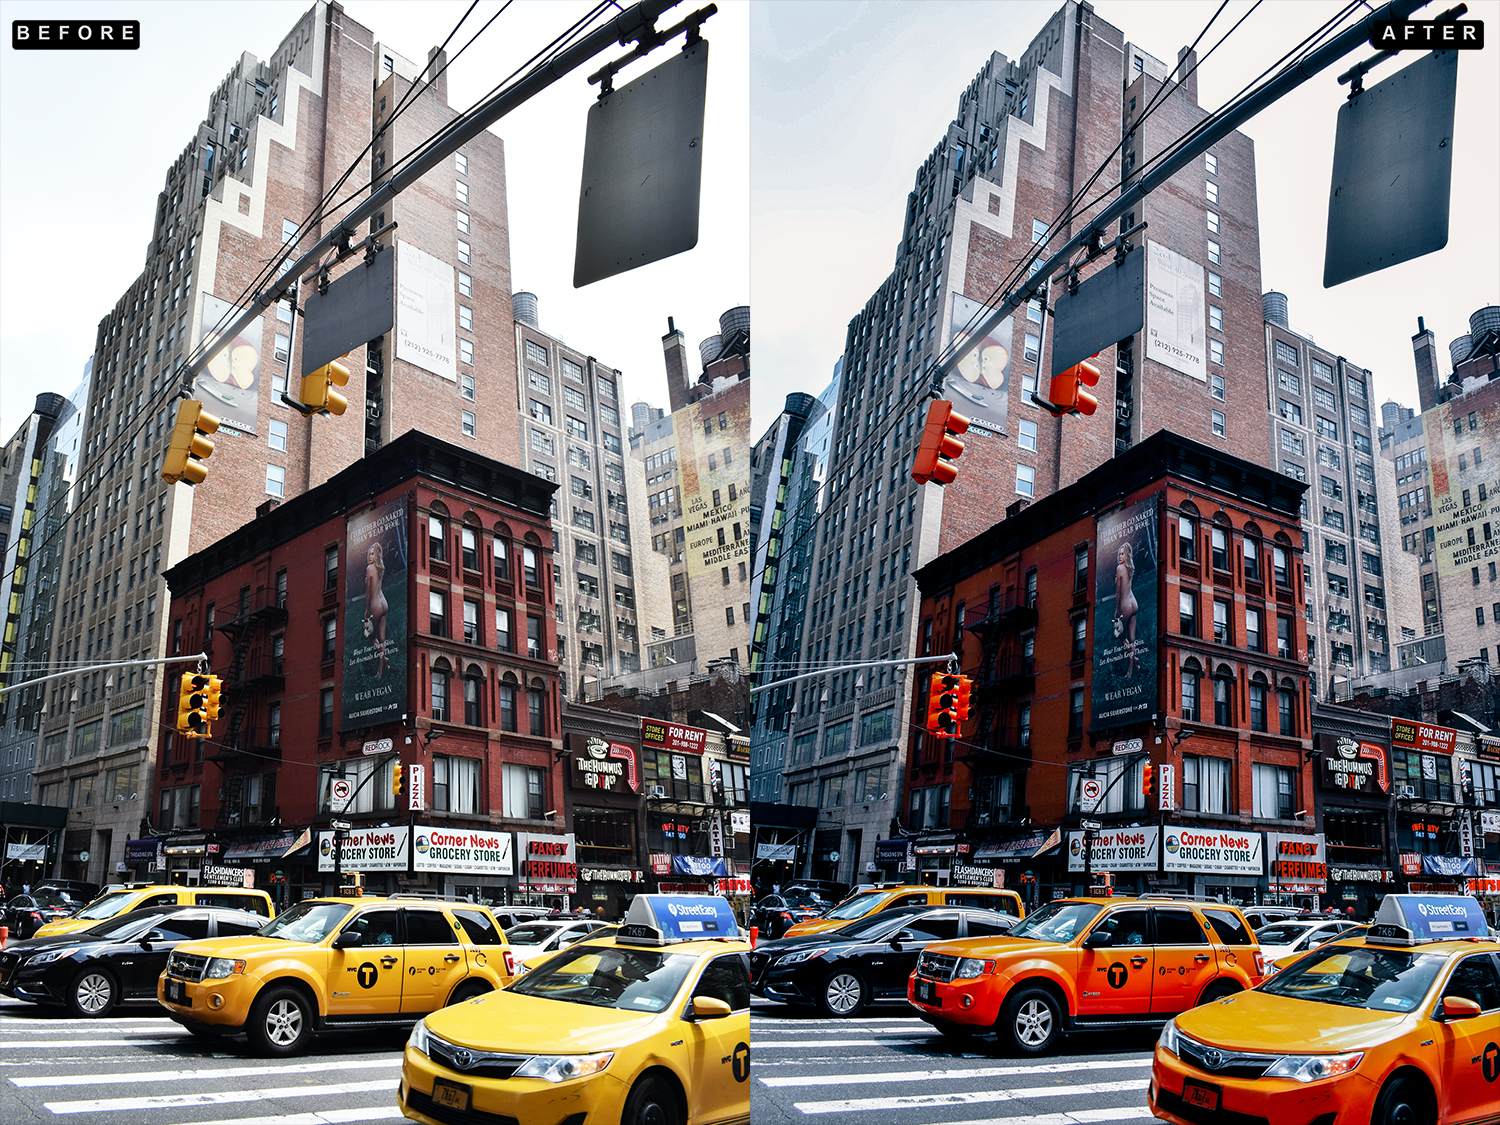 Famous City's / NEW YORK - Photoshop Action